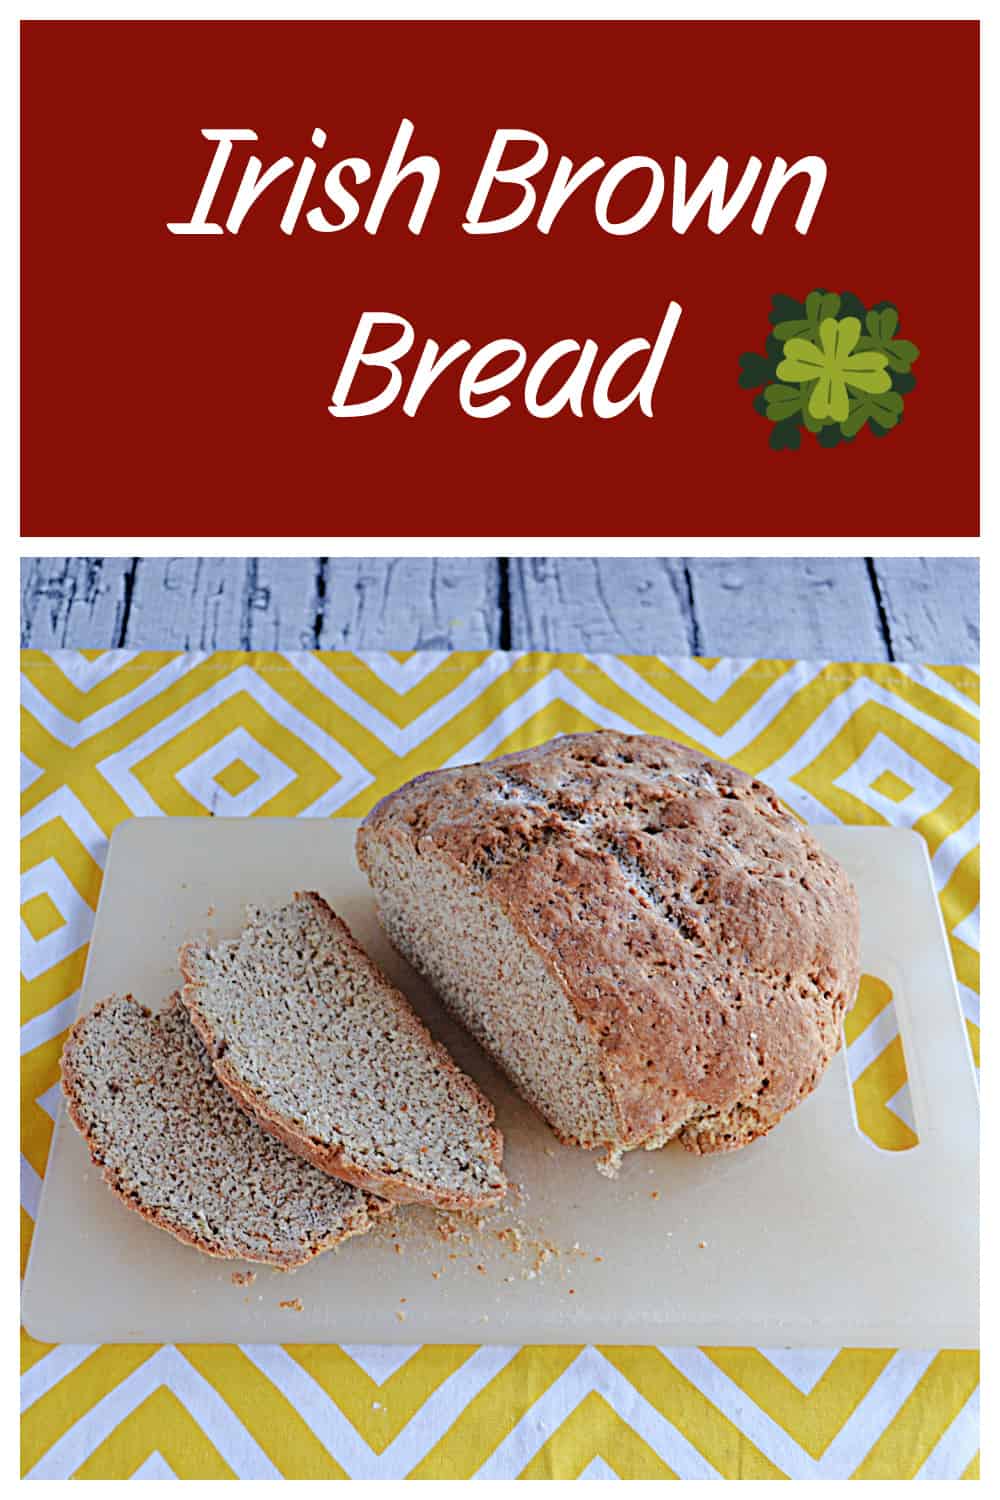 Pin Image: Text title, a loaf of bread with a few slices cut off.